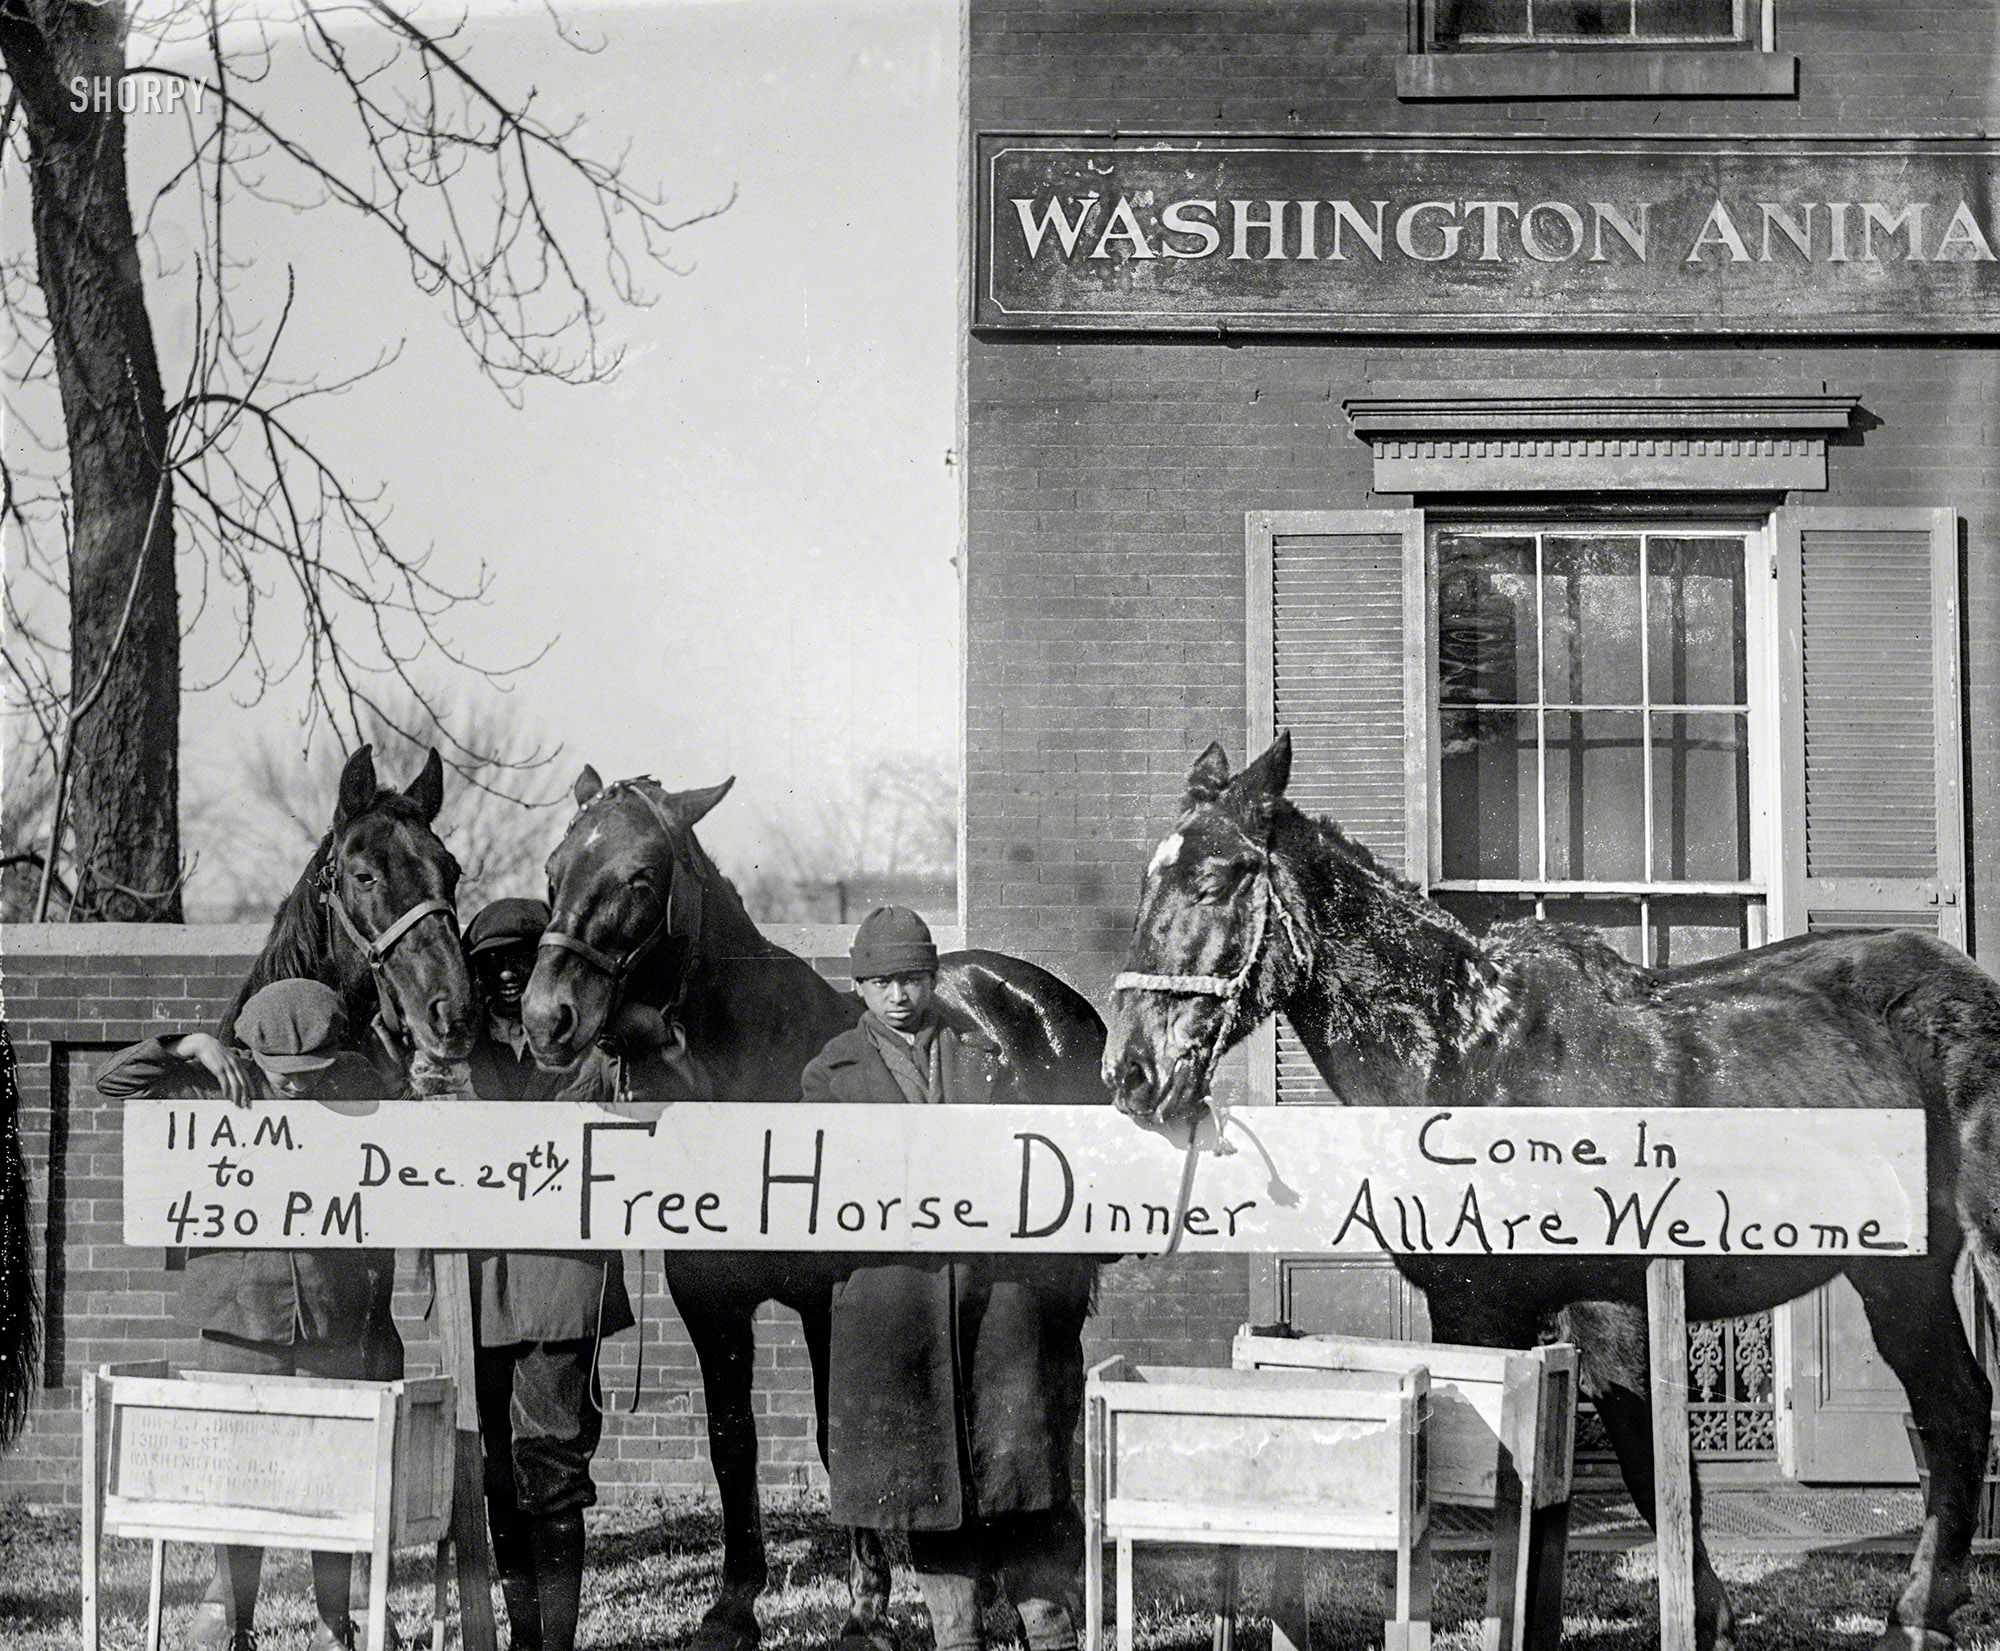 December 29, 1923. "Horse Christmas party, Animal Rescue League." Maybe a few days late for a Christmas party, but then again here we are showing up 92 years after the fact. National Photo Company Collection glass negative. View full size.